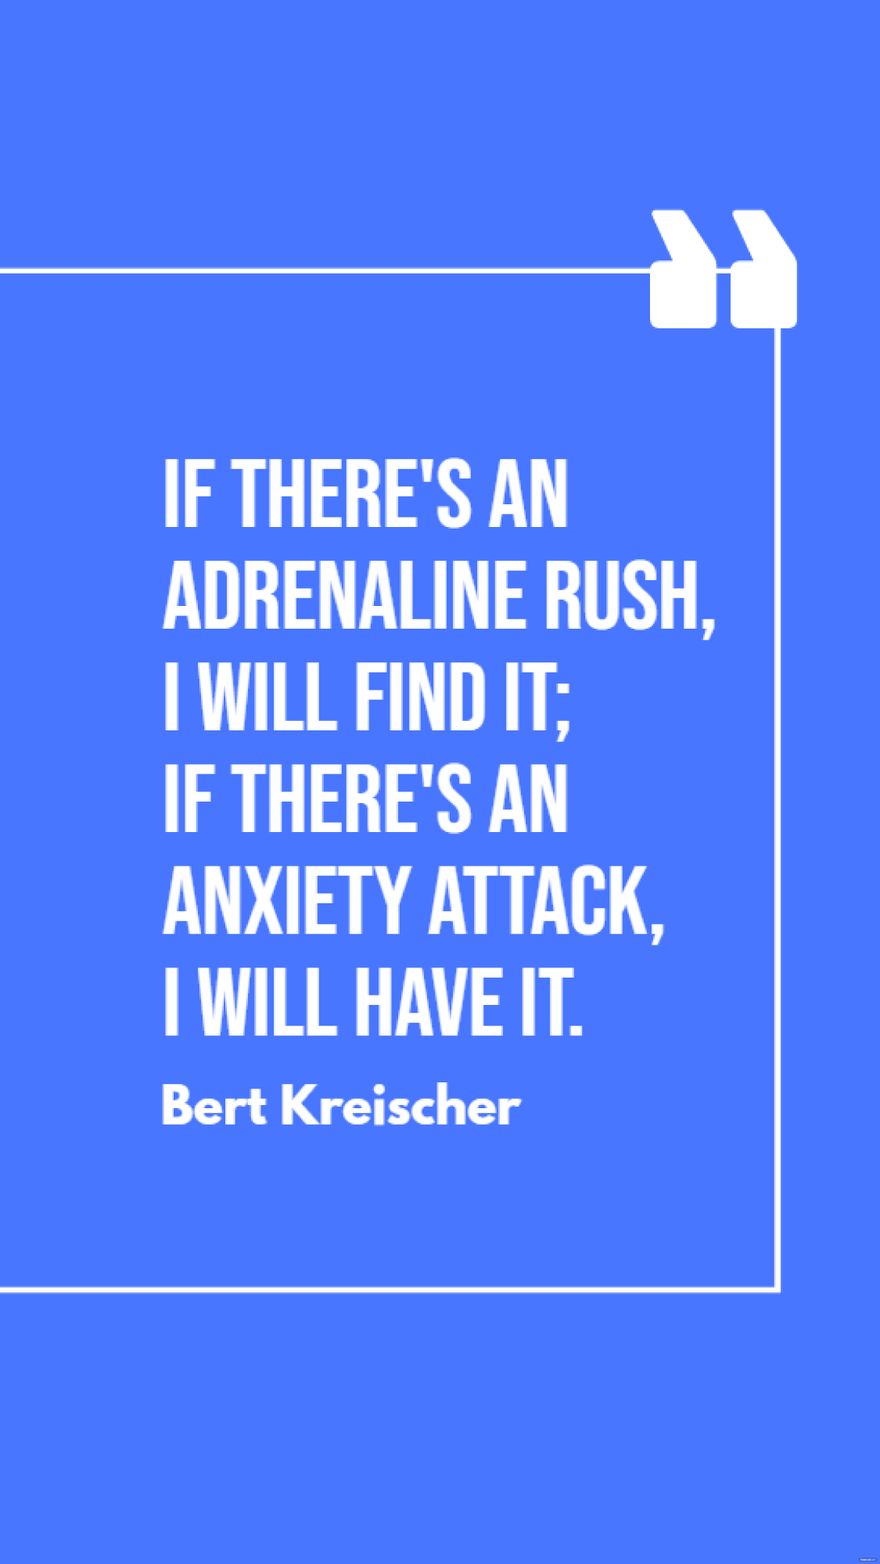 Bert Kreischer - If there's an adrenaline rush, I will find it; if there's an anxiety attack, I will have it.